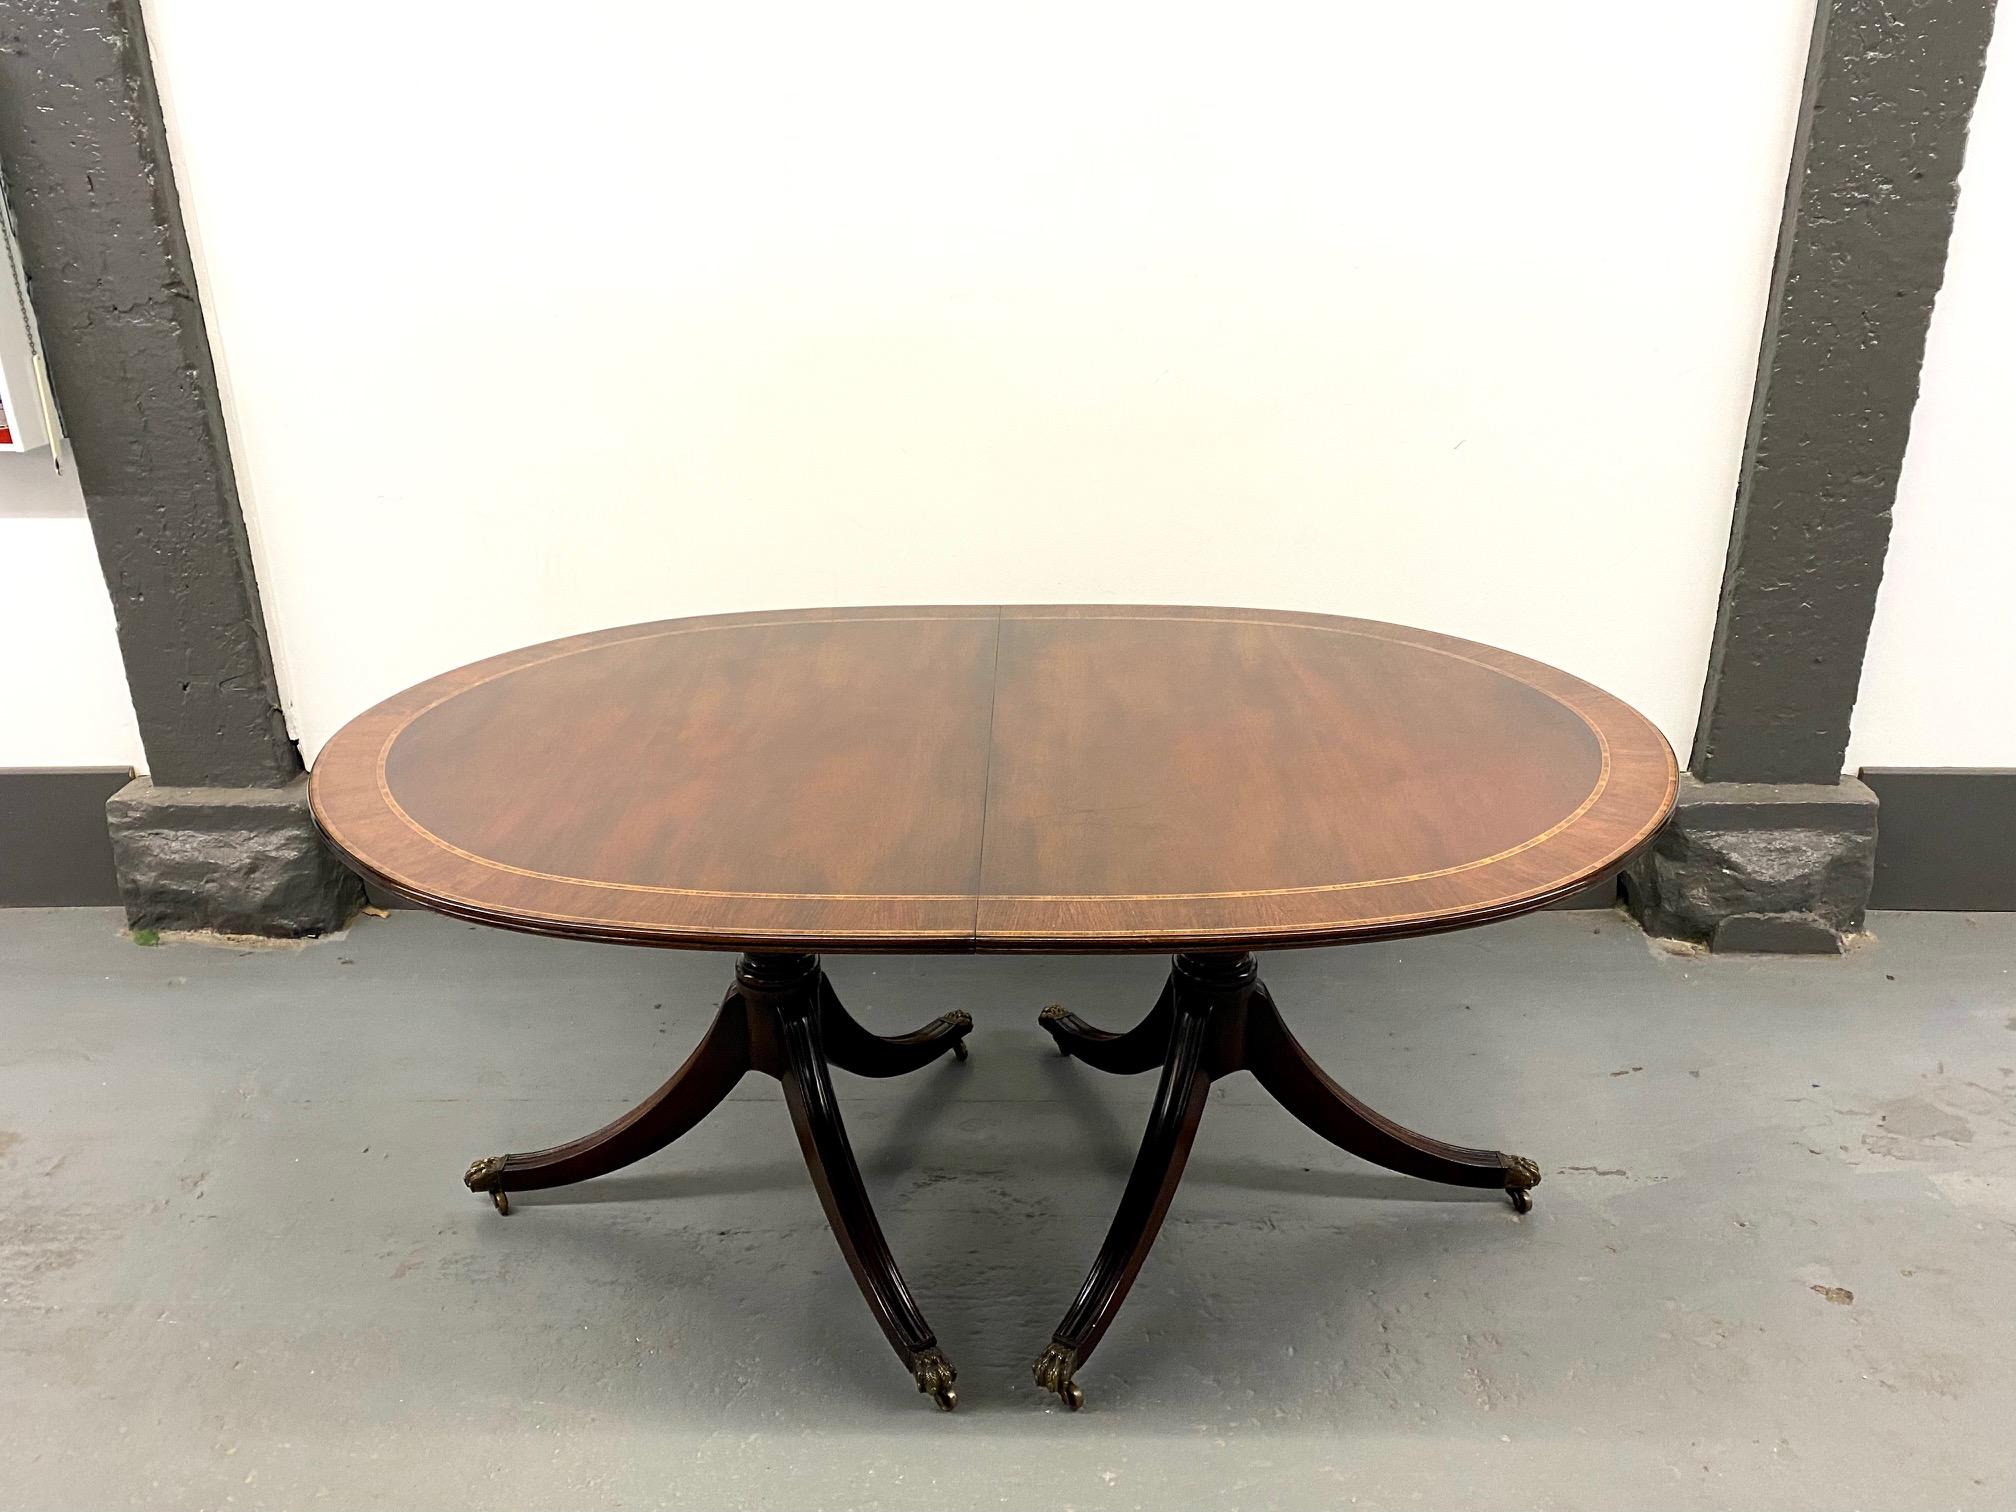 North American Fine figured Mahogany  Regency Style Double Pedestal Dining Table